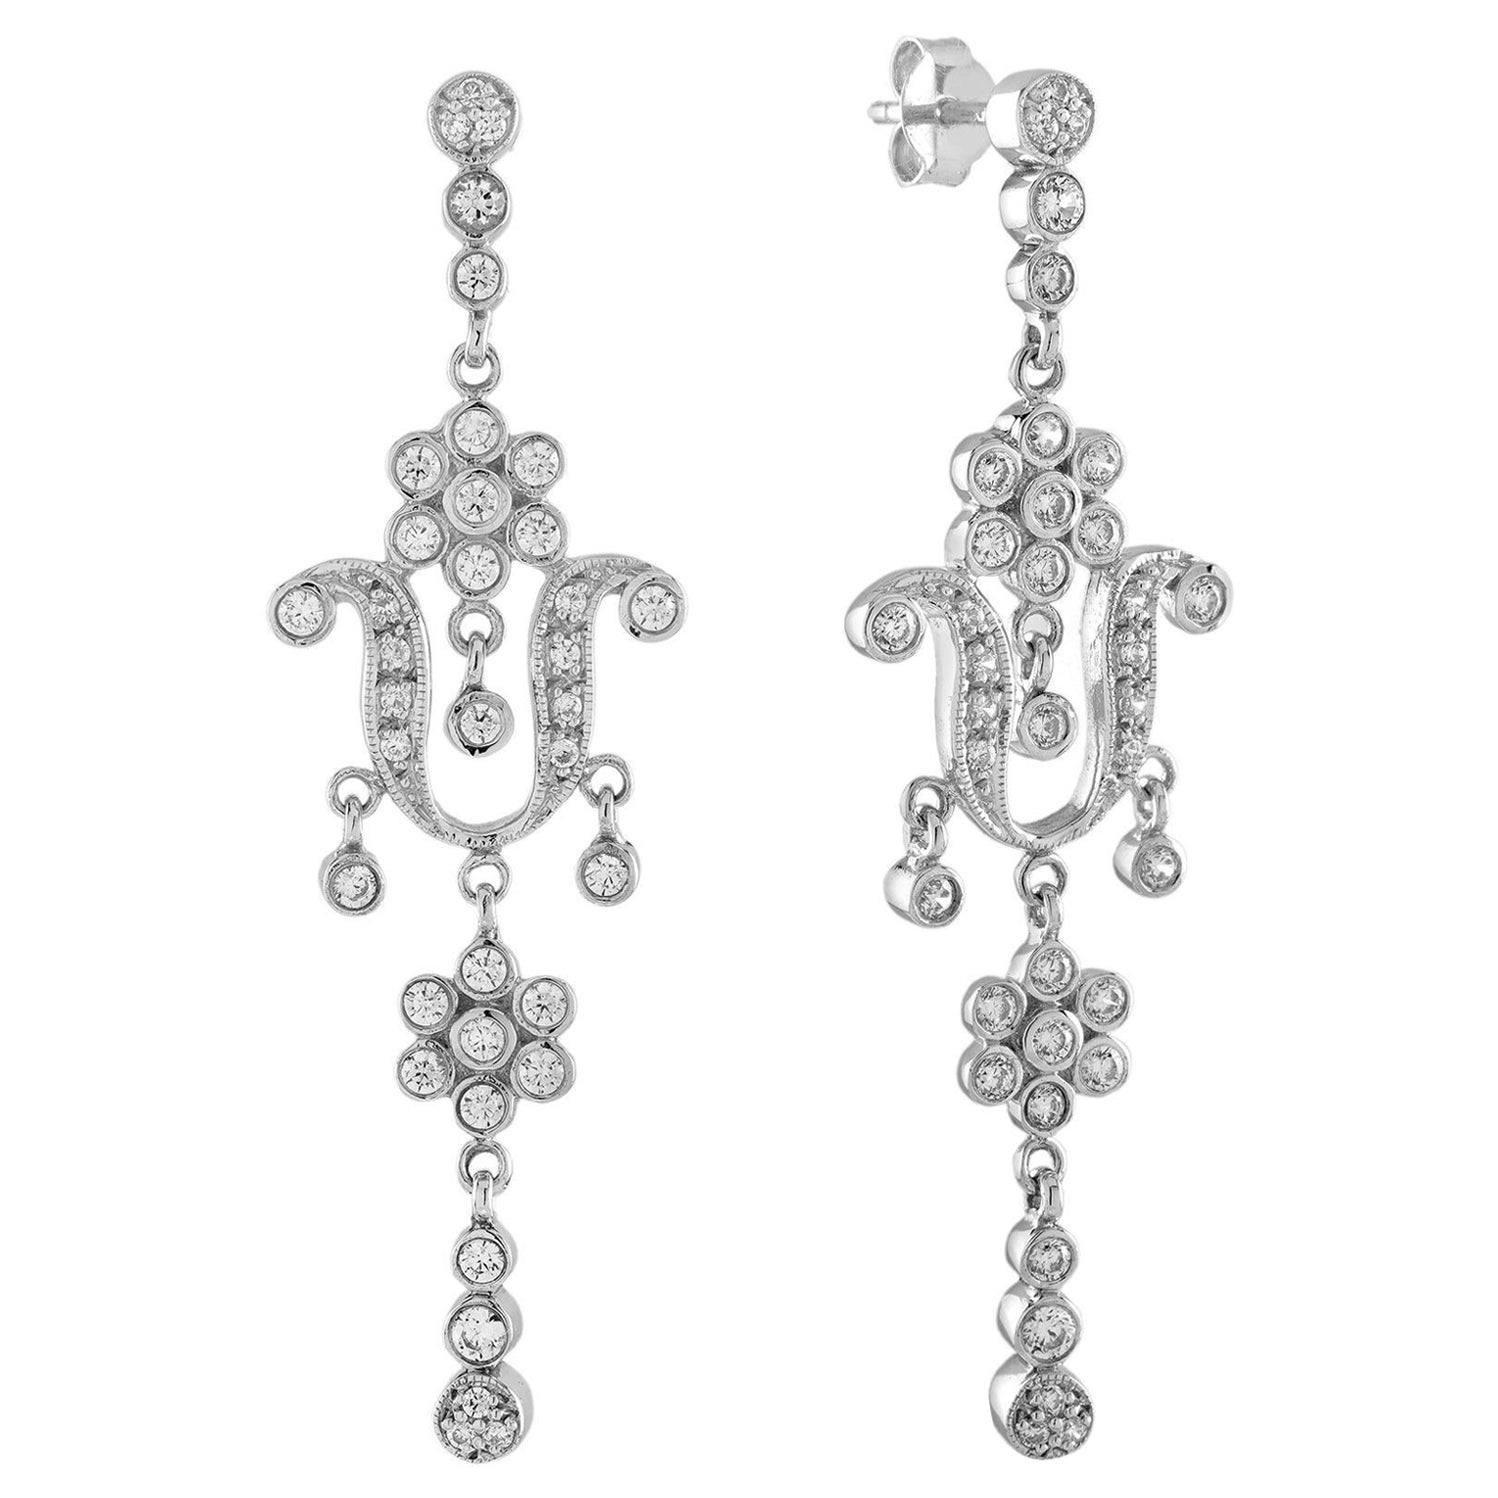 1.2 Ct. Diamond Edwardian Style Floral Dangle Earrings in 18K White Gold For Sale